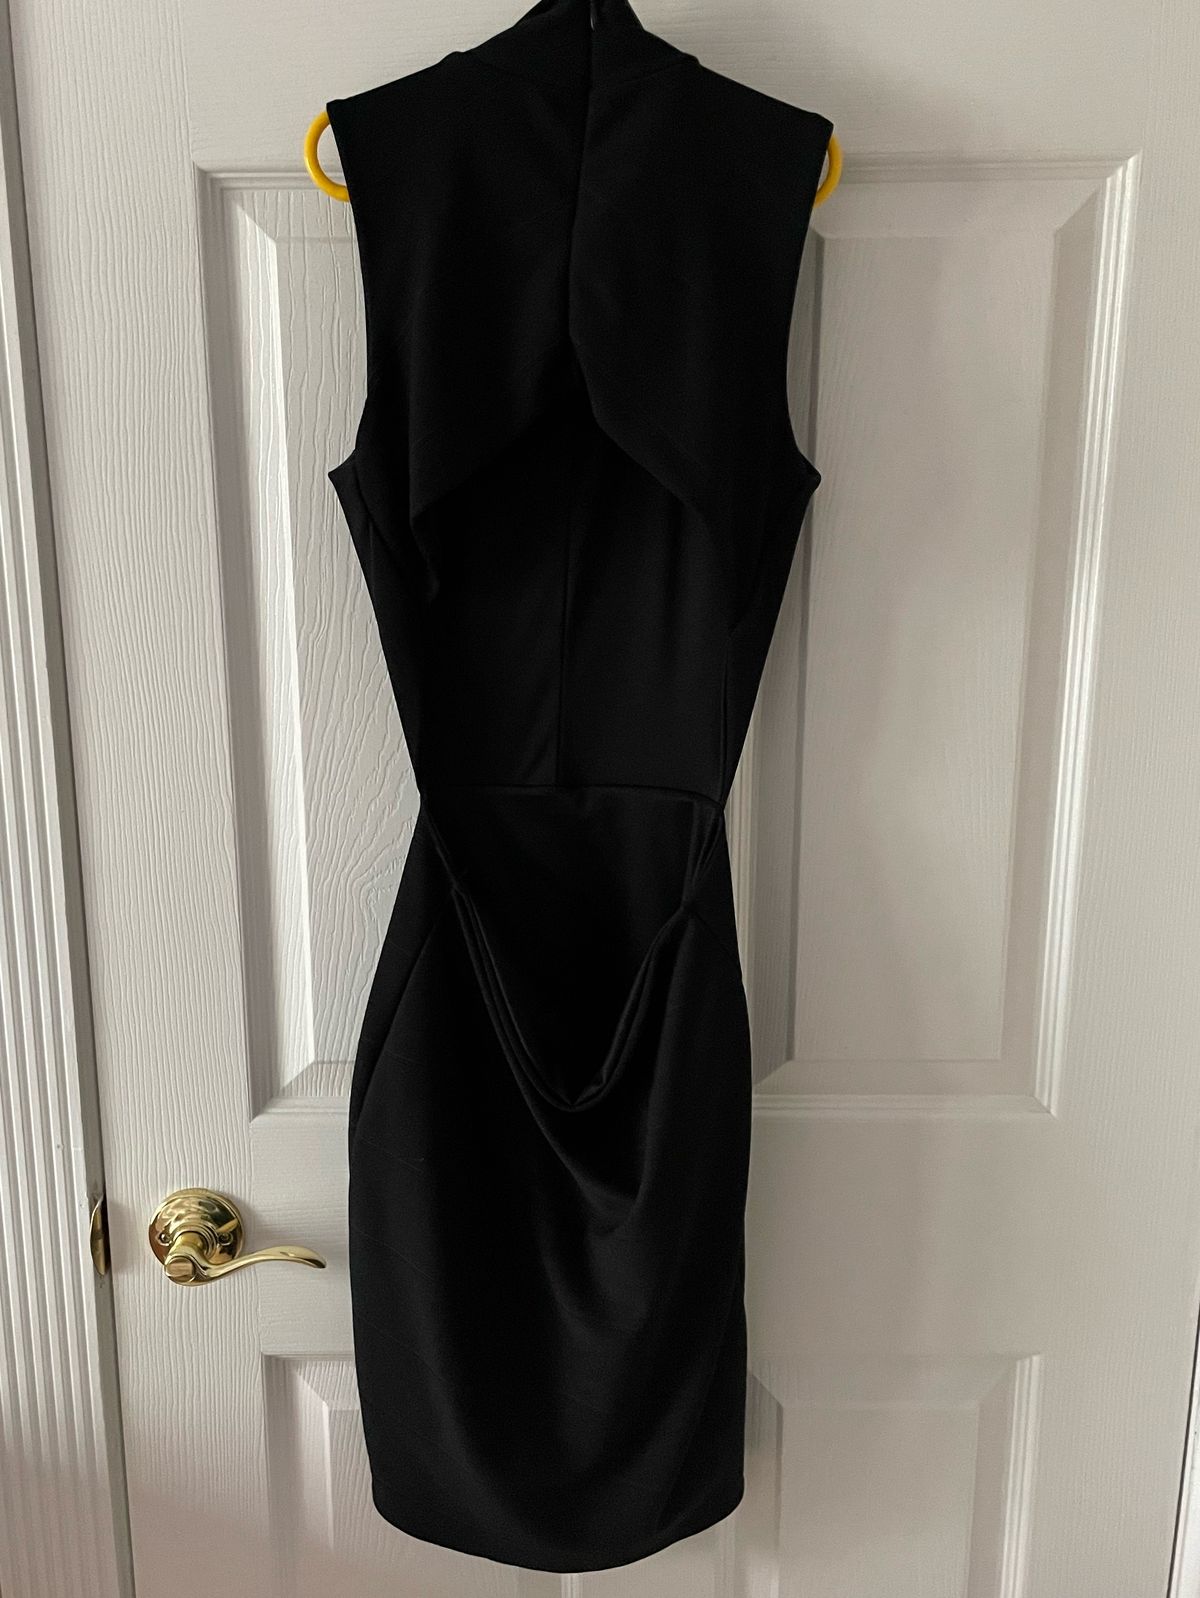 Missguided Size 0 High Neck Black Cocktail Dress on Queenly